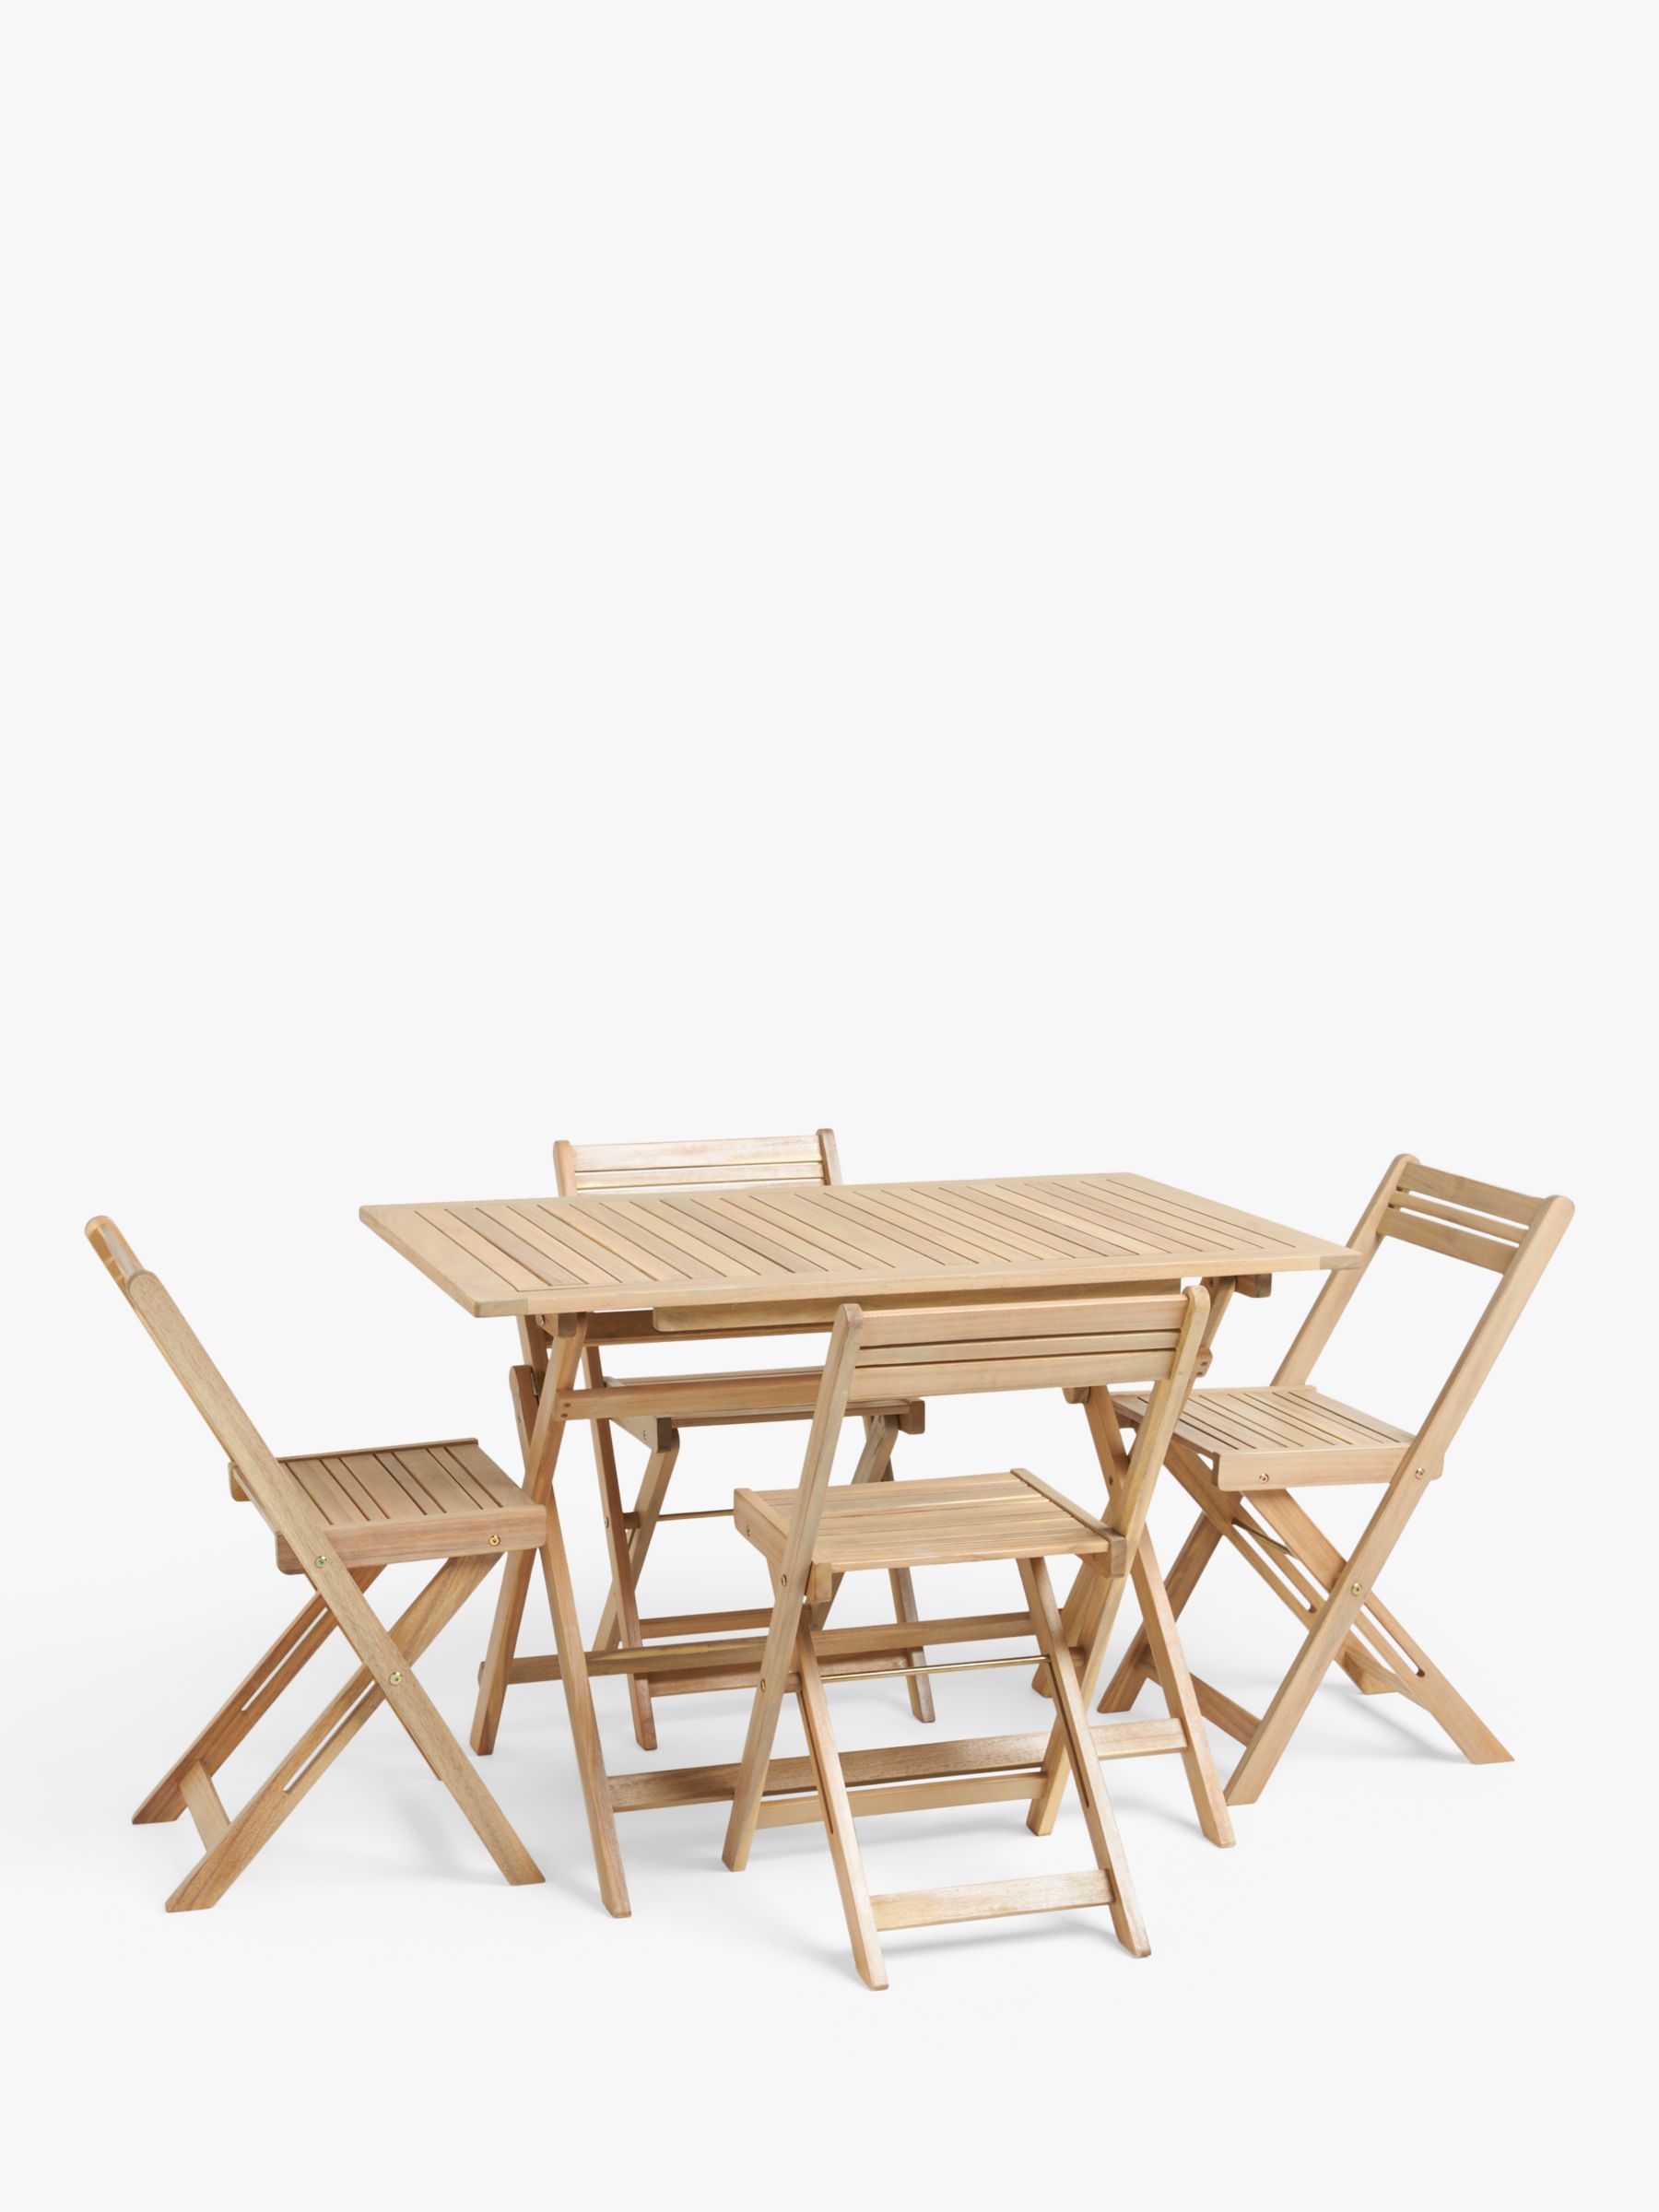 John Lewis ANYDAY Acacia Wood Foldable 4-Seater Garden Dining Table & Chairs Set, Natural